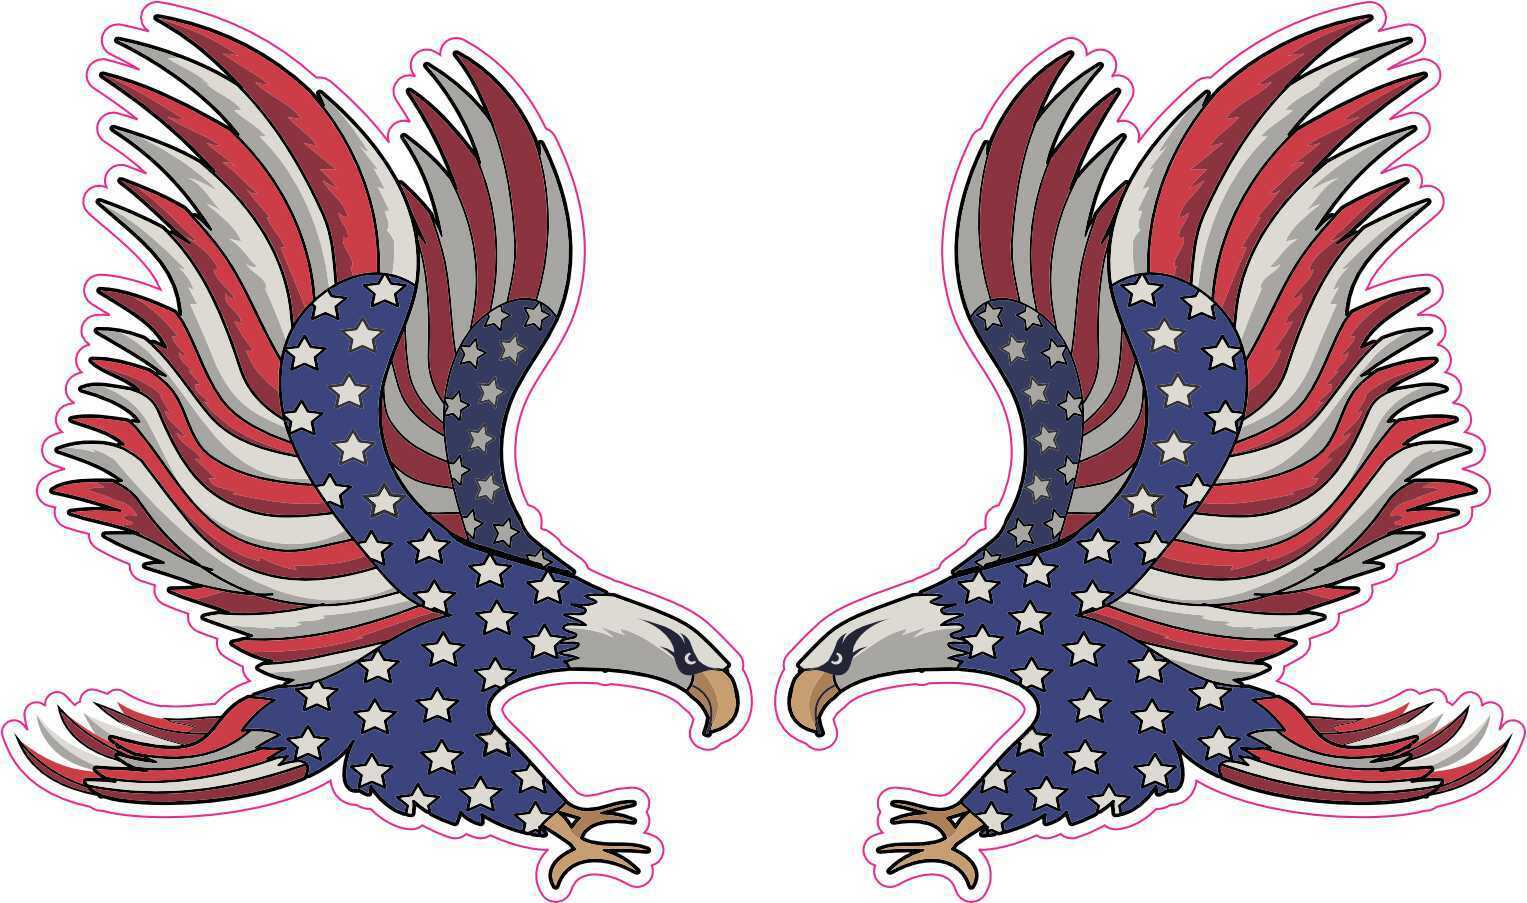 USA Eagle Stickers Car Truck Vehicle Bumper Decal